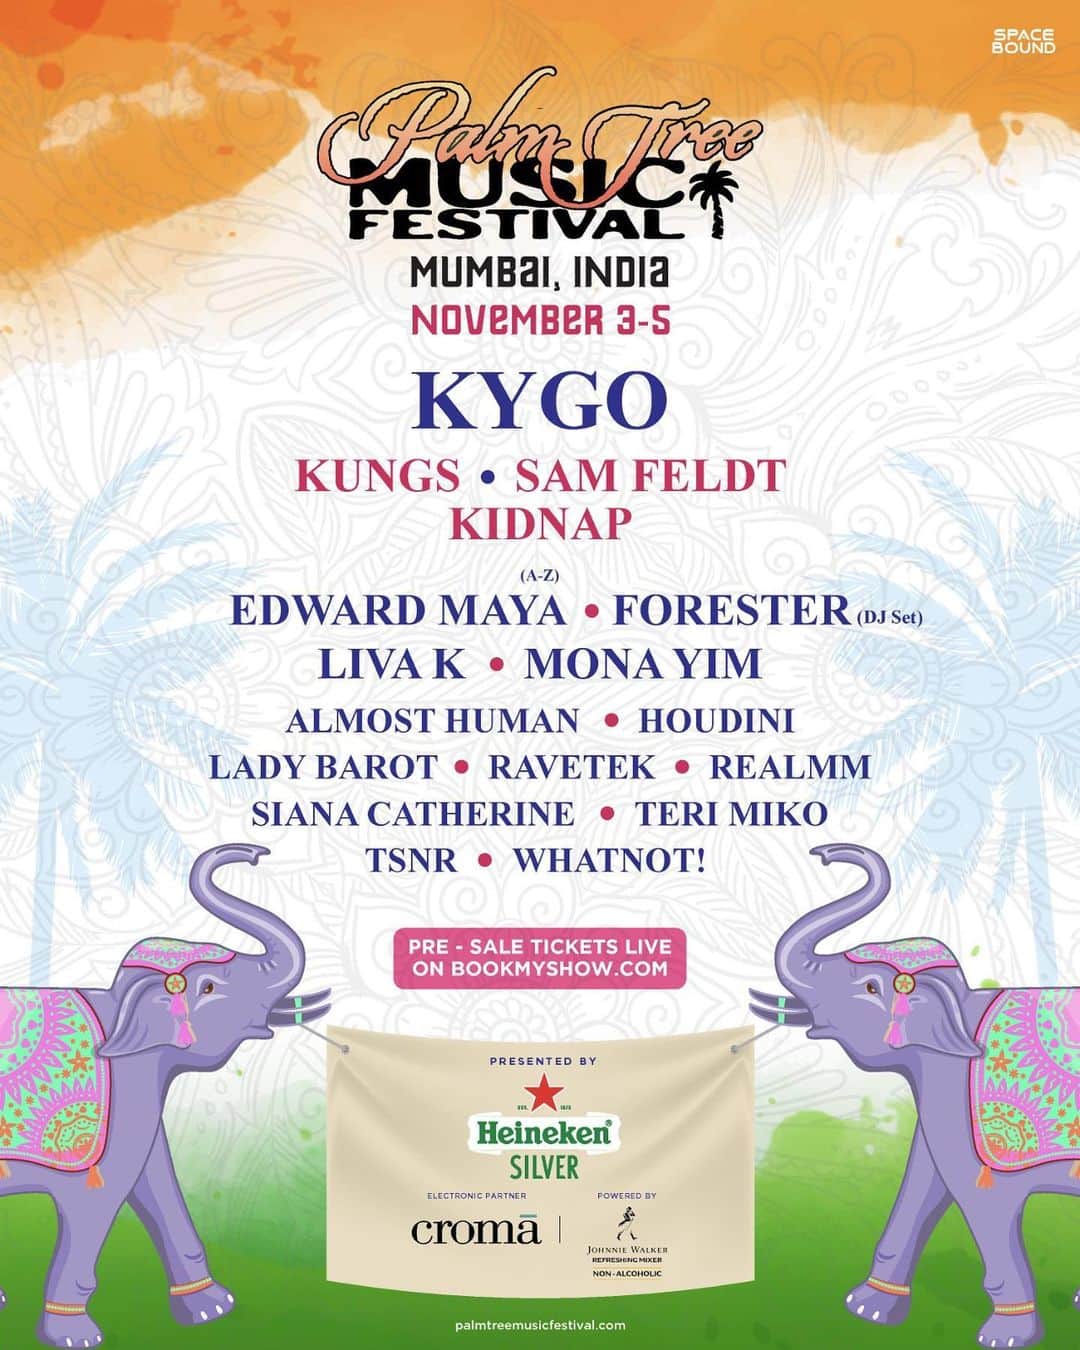 KYGOのインスタグラム：「India 🇮🇳  Get ready for Palm Tree Festival’s India Debut 🙌🏻 We are so excited to unveil this exciting artist lineup. Can’t wait for you all to join us on 3/11 - 5/11 in Mumbai 🌴  Registered users please look for a secret link in your inbox 📥 and grab your tickets now!」